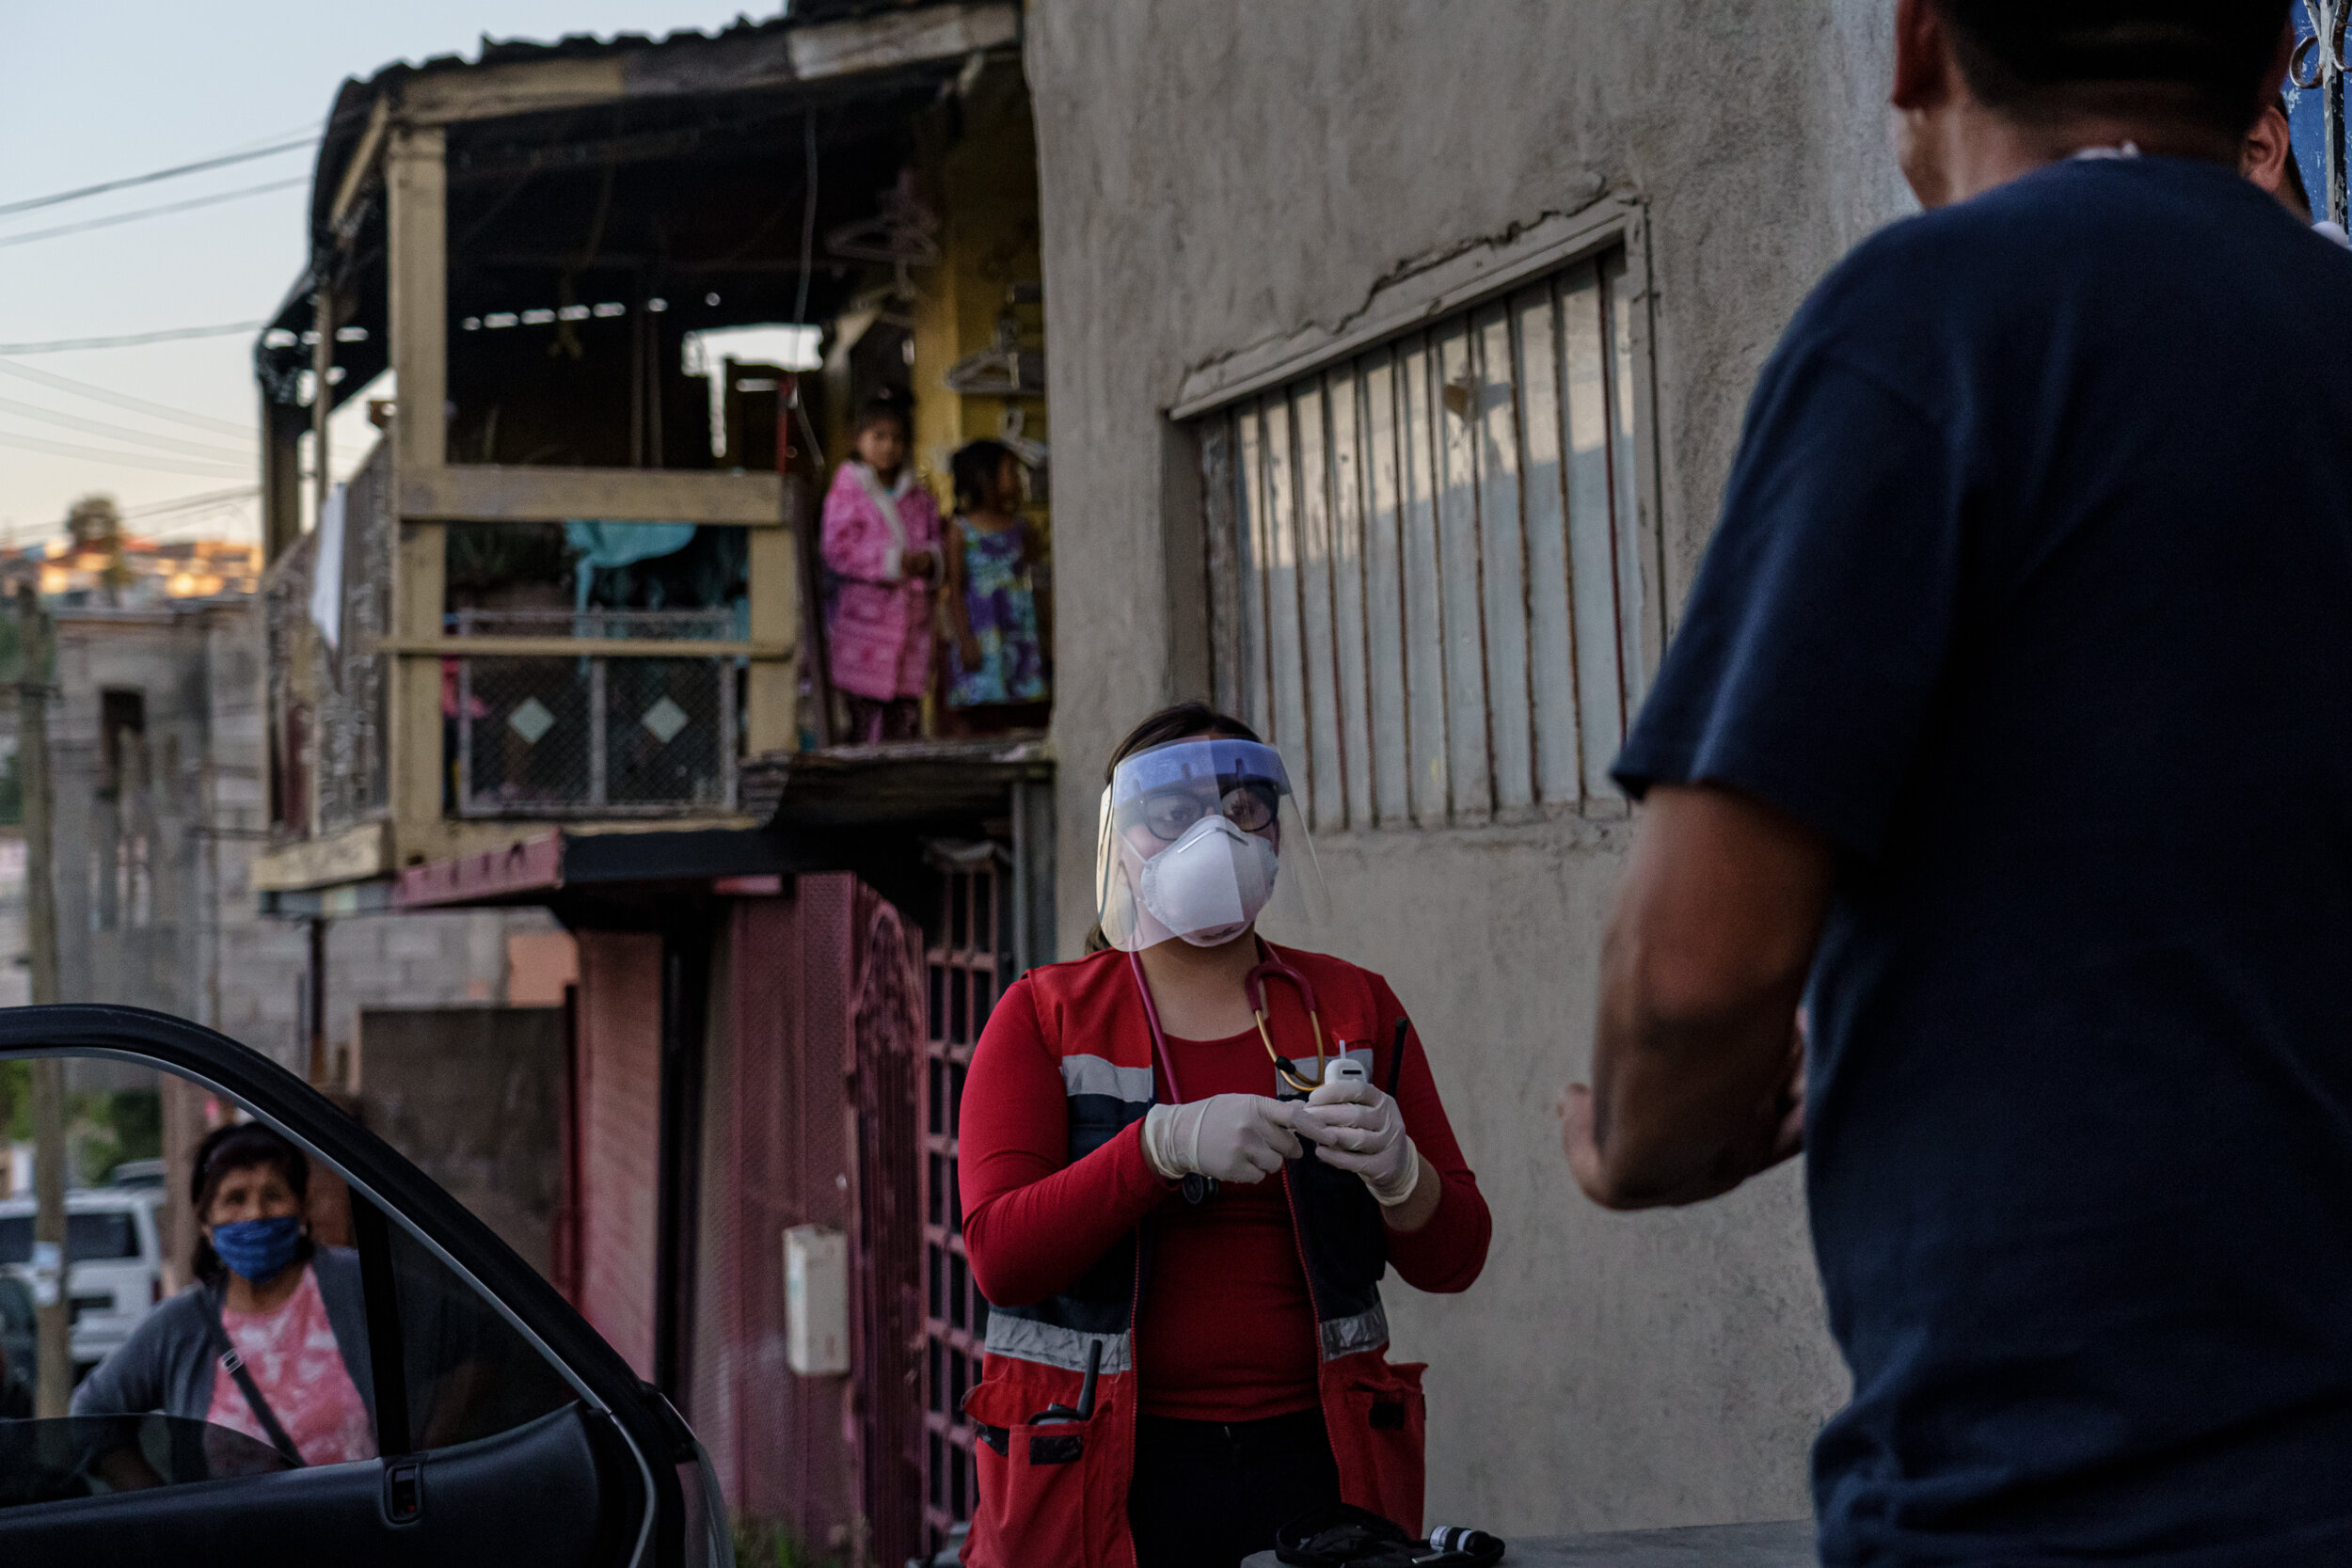  Valeria de la torre Beaven attends to an emergency call where a patient reportedly suffers from difficulty breathing, in Tijuana, Mexico, on April 28, 2020.  